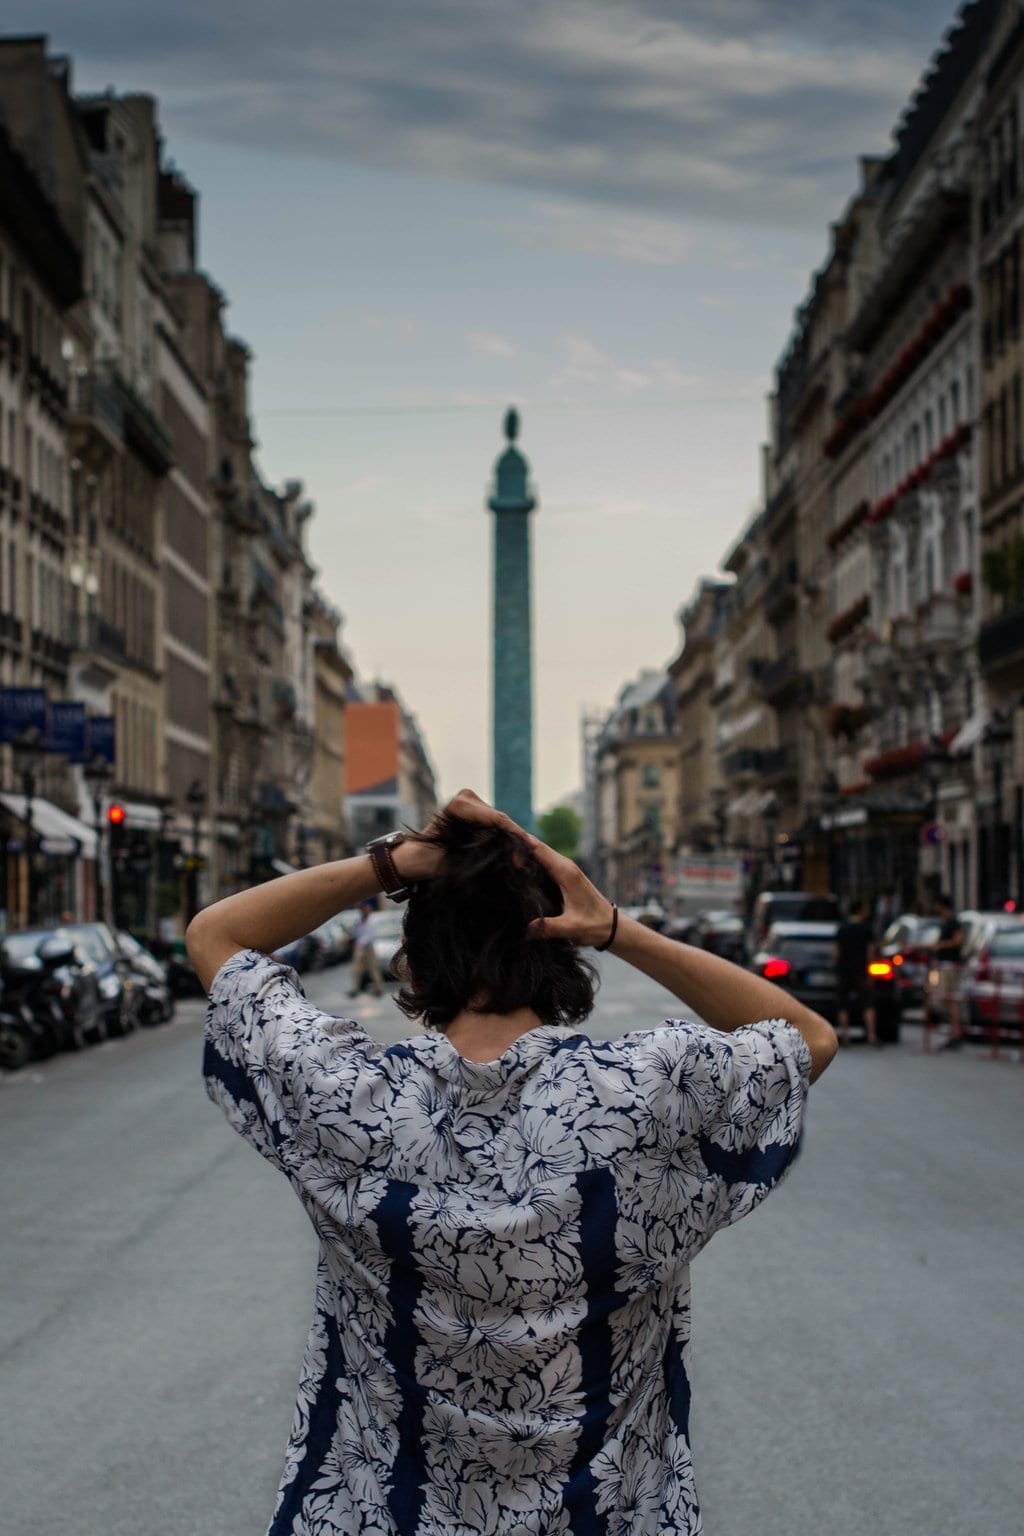 The 16 Stupid Mistakes You Should Avoid in Paris